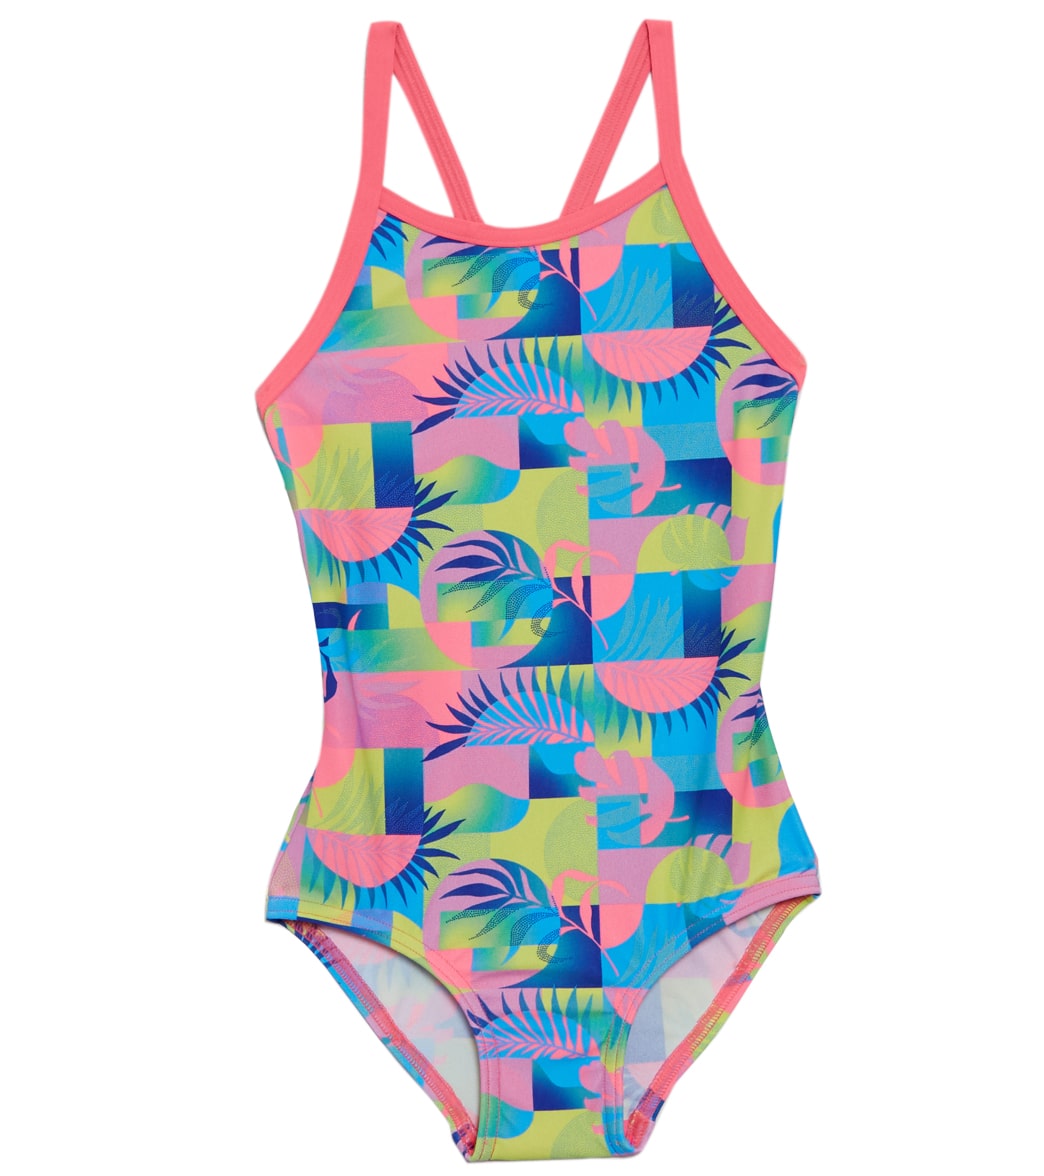 Funkita Toddler Girls' Sunkissed One Piece Swimsuit - Pink/Multi 2T Polyester - Swimoutlet.com